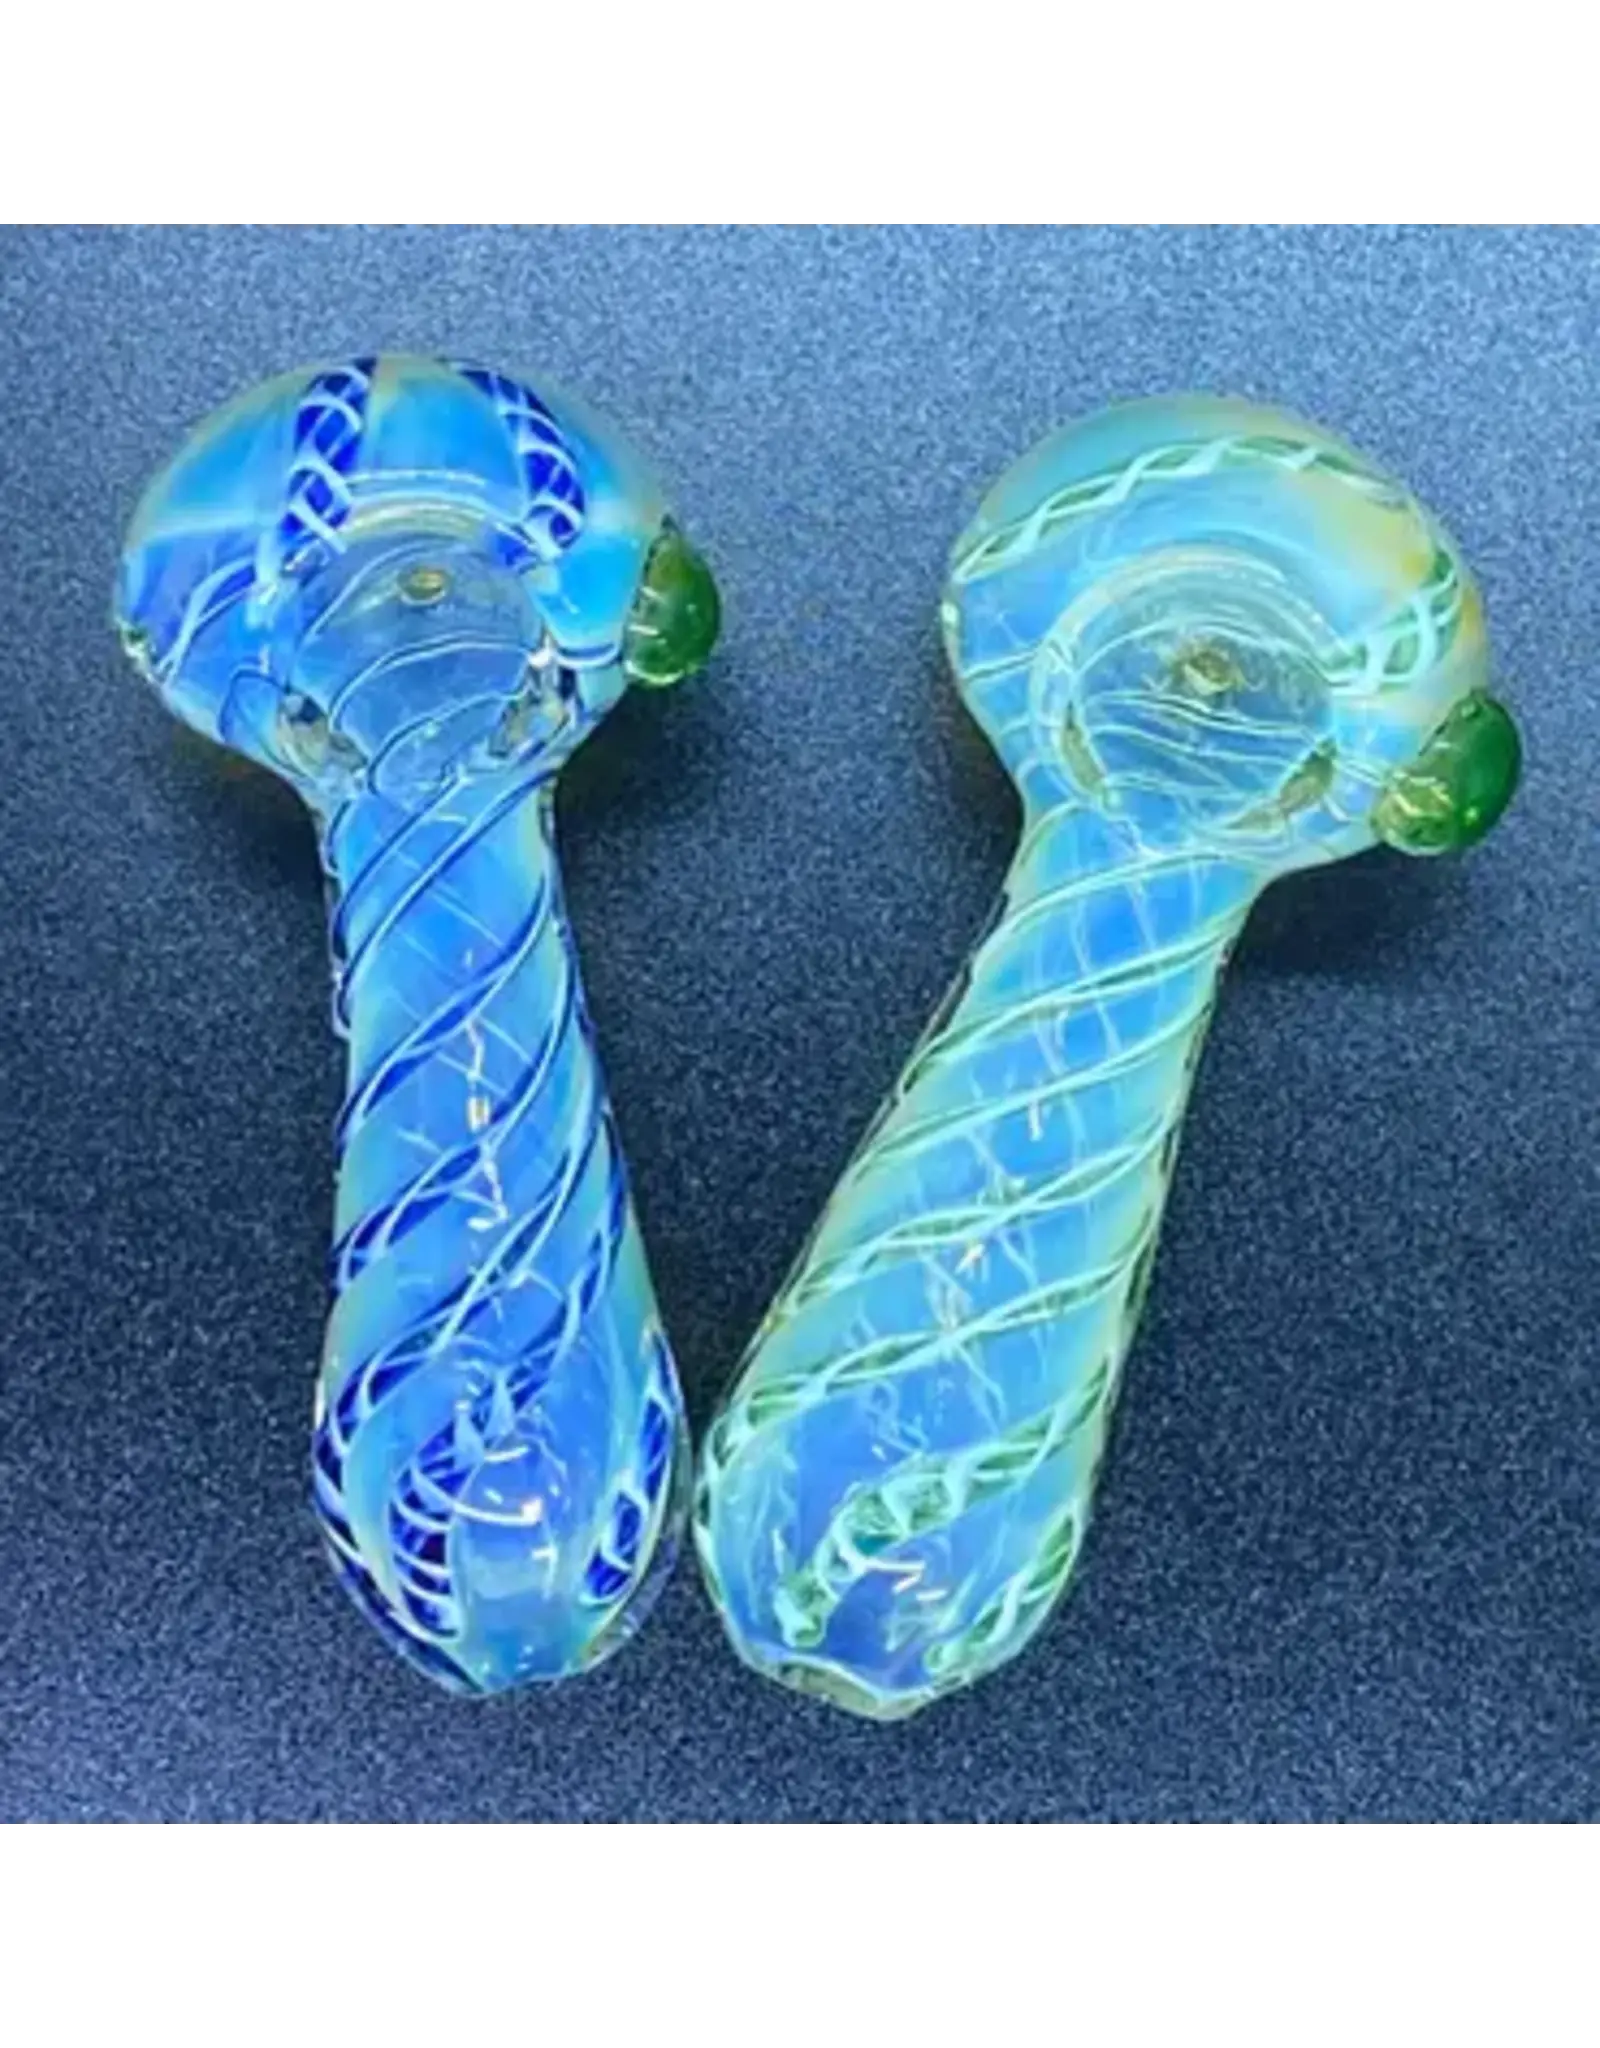 Smokerz Glass 3.5" Silver Fume Net Color Lines